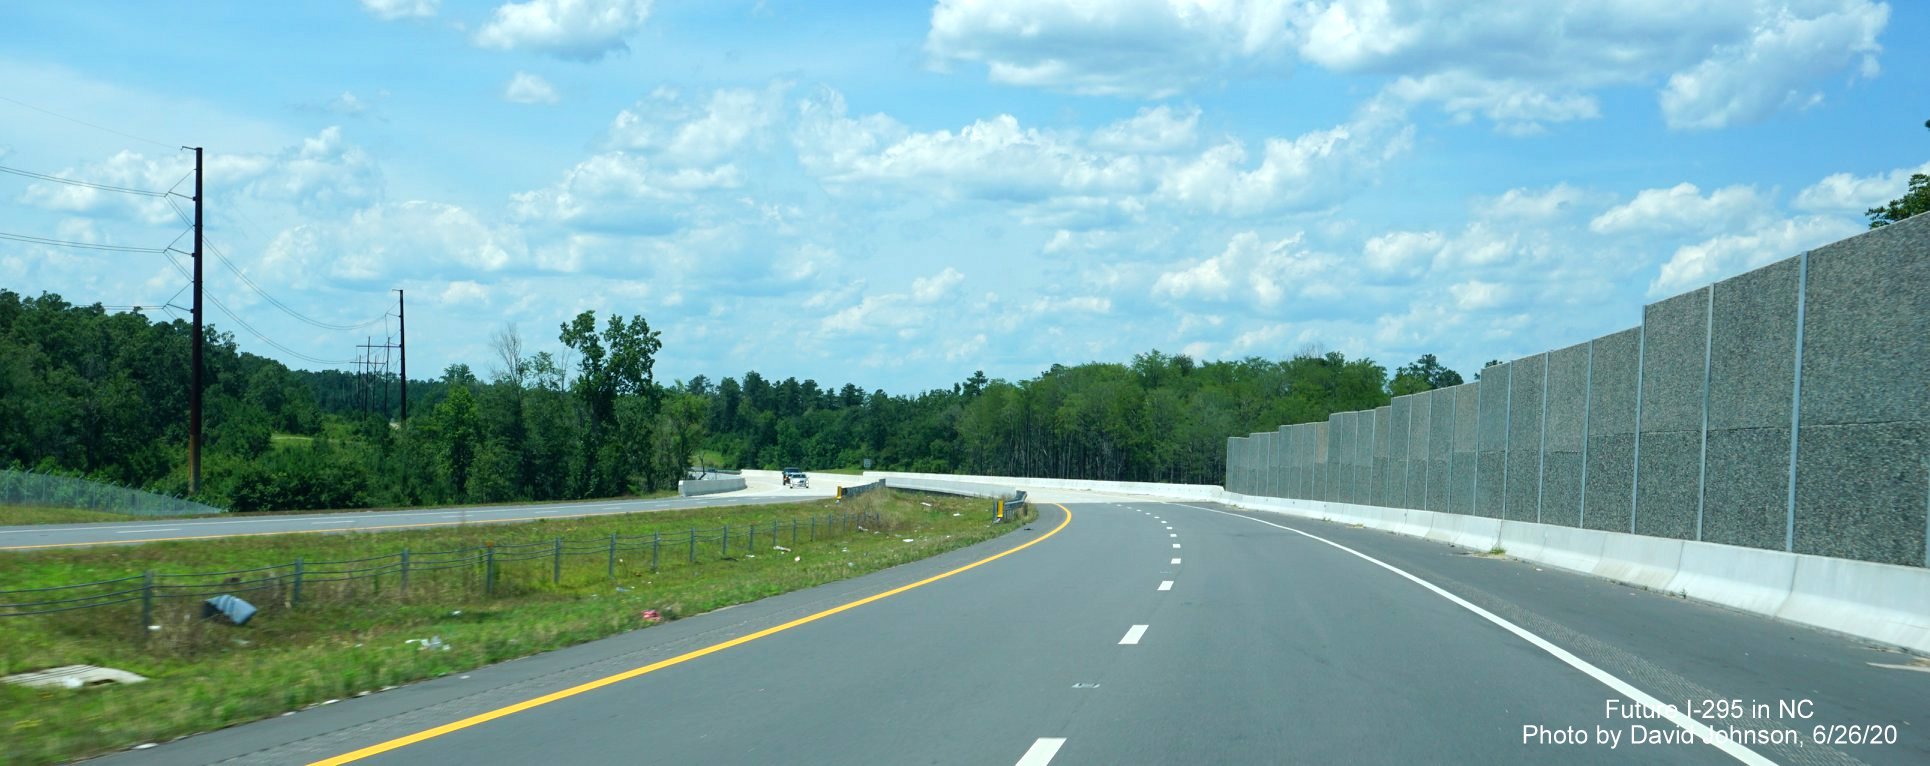 Image of noise wall installed along NC 295 (Future I-295) North between Cliffdale Road and Canopy Lane in
        Fayetteville, by David Johnson June 2020